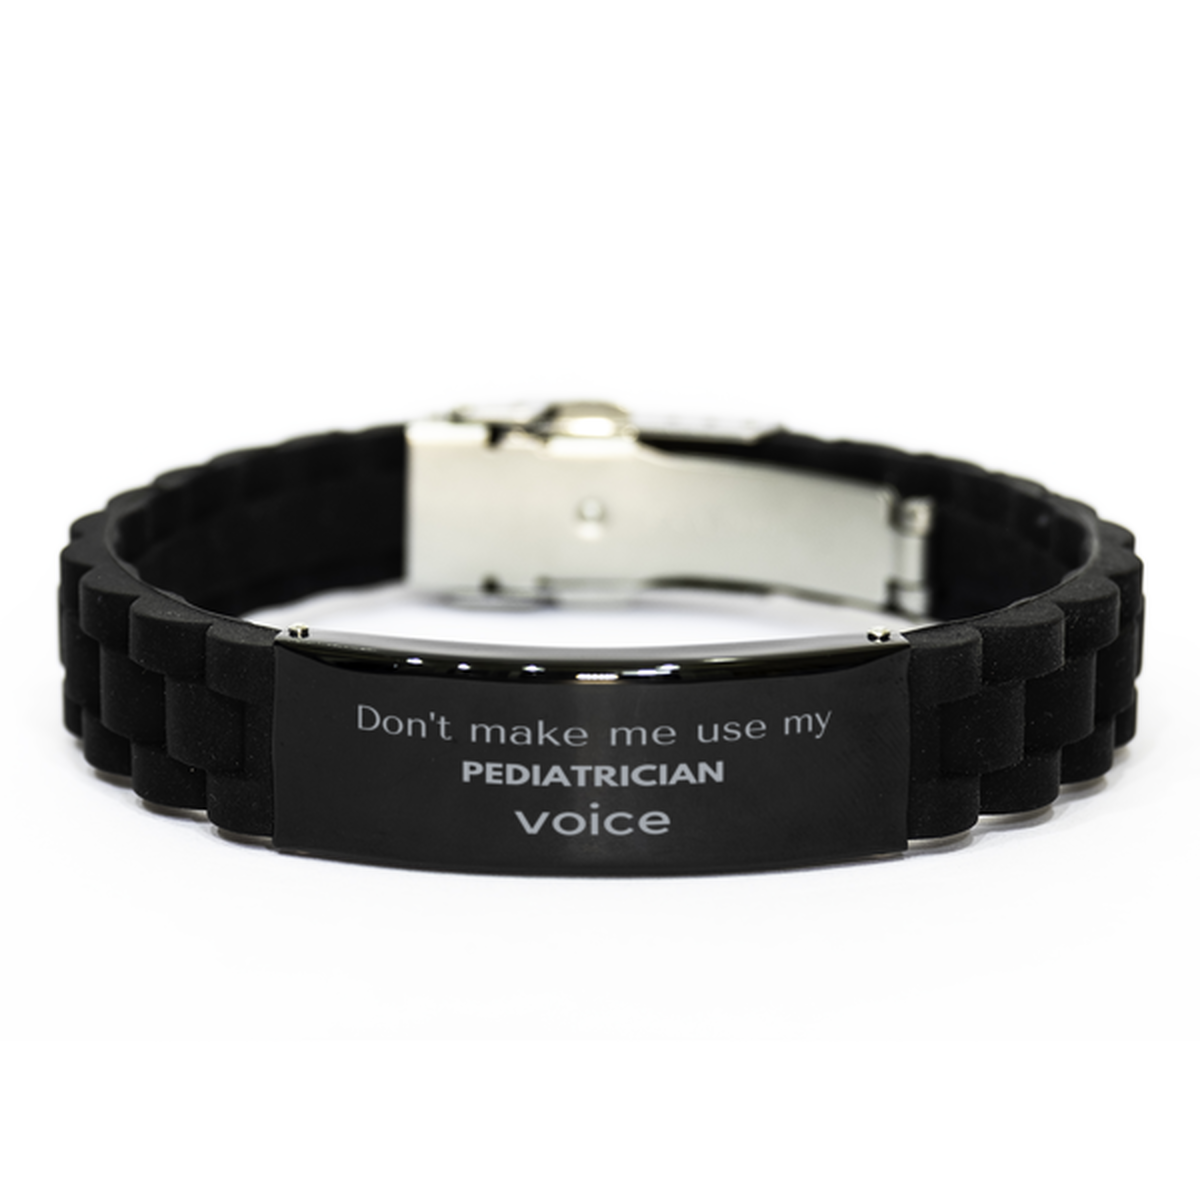 Don't make me use my Pediatrician voice, Sarcasm Pediatrician Gifts, Christmas Pediatrician Black Glidelock Clasp Bracelet Birthday Unique Gifts For Pediatrician Coworkers, Men, Women, Colleague, Friends